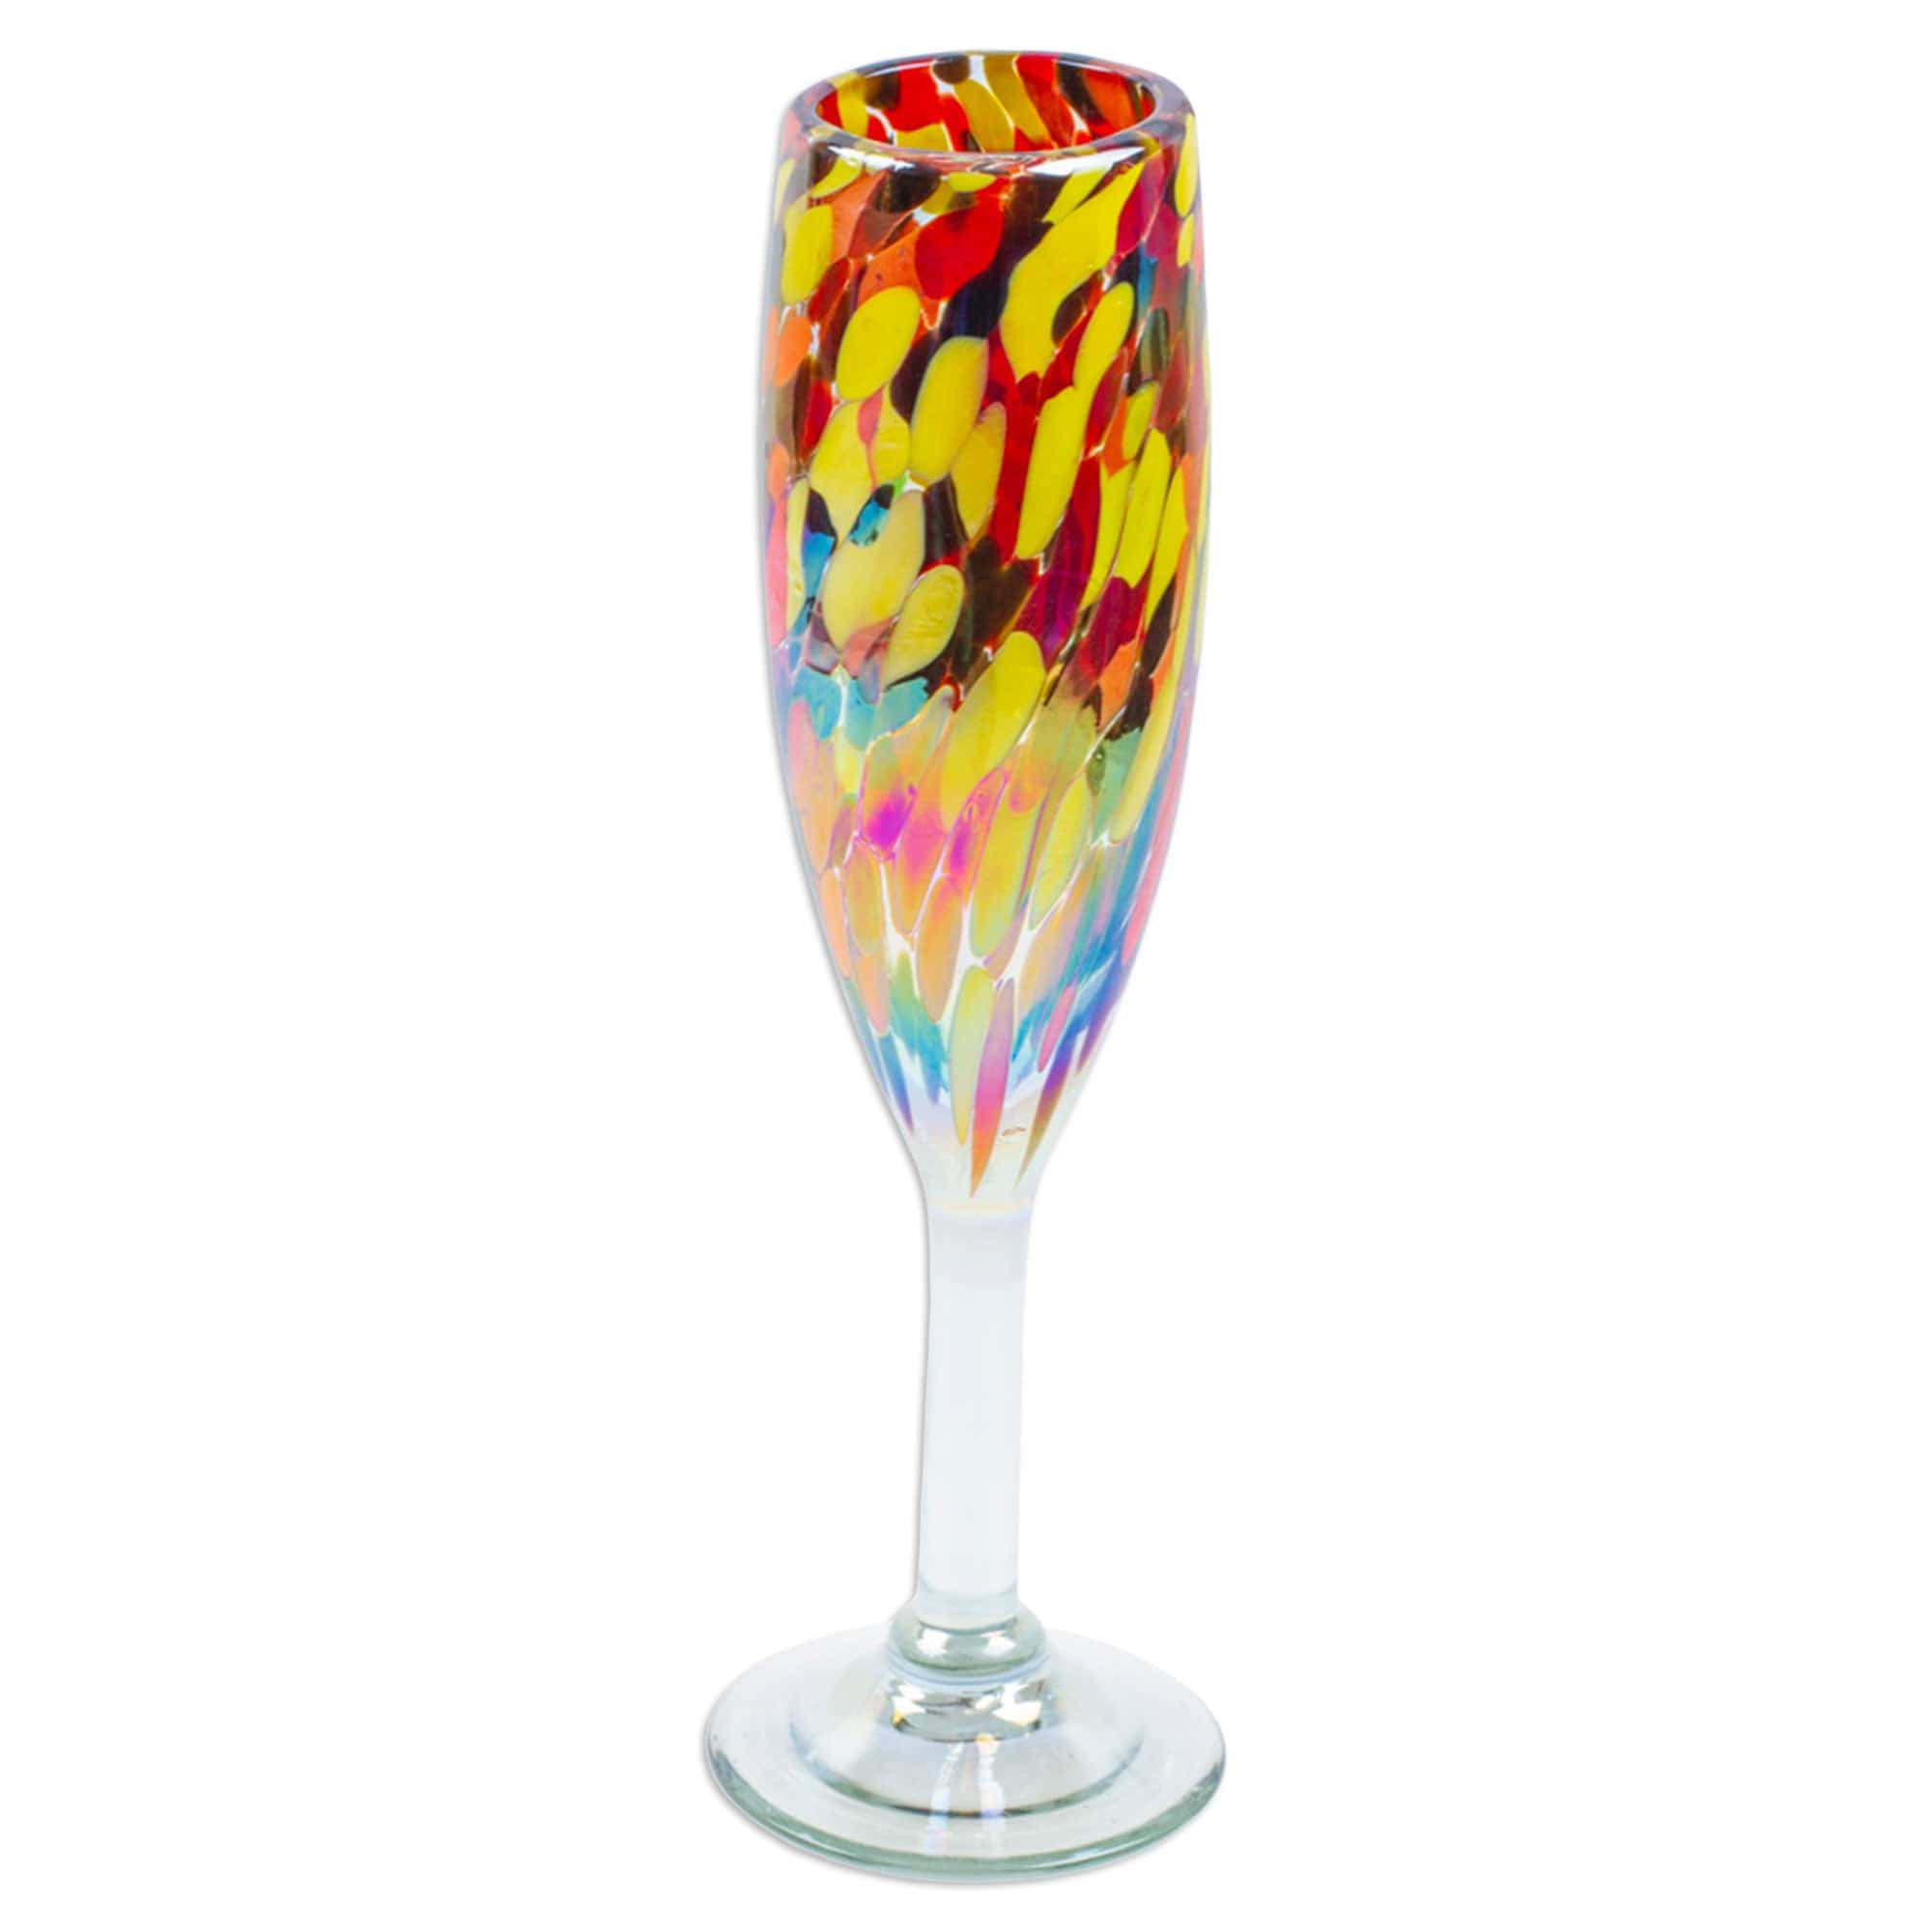 Solis™ Mouth Blown Glass Champagne Flute (set of 4)